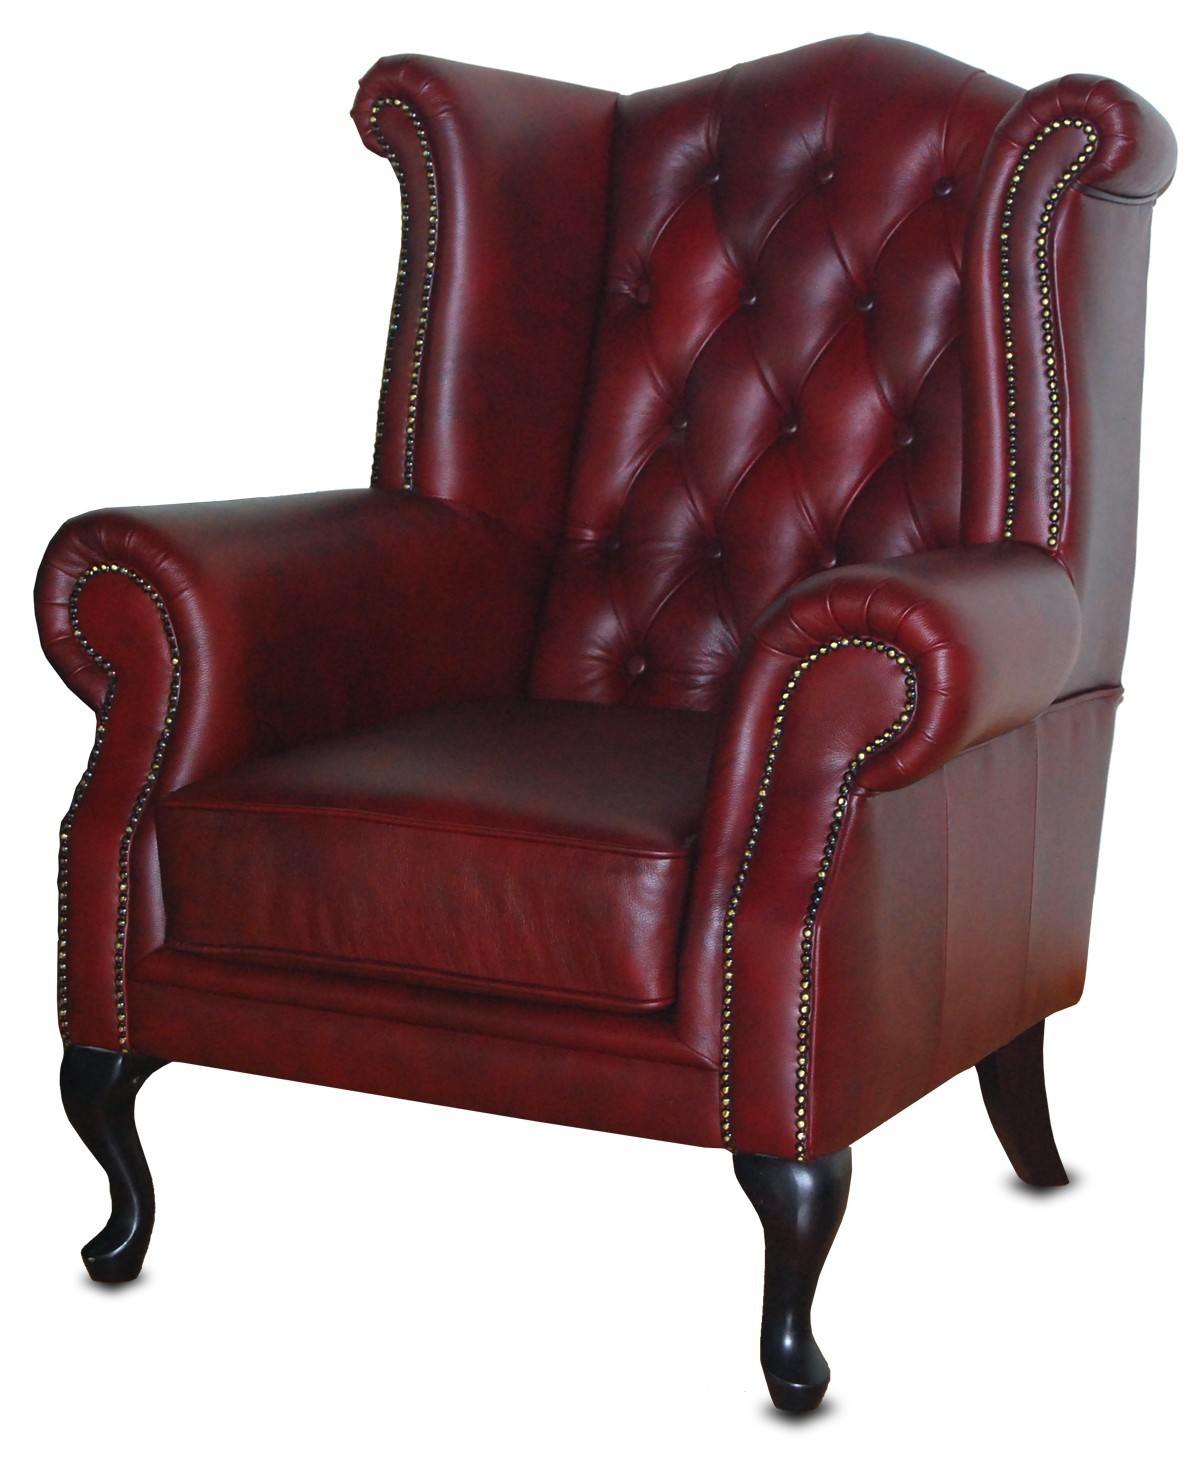 Chesterfield Lounges Chesterfield Sofas Wingback Chairs Wing Back Recliners Chesterfield